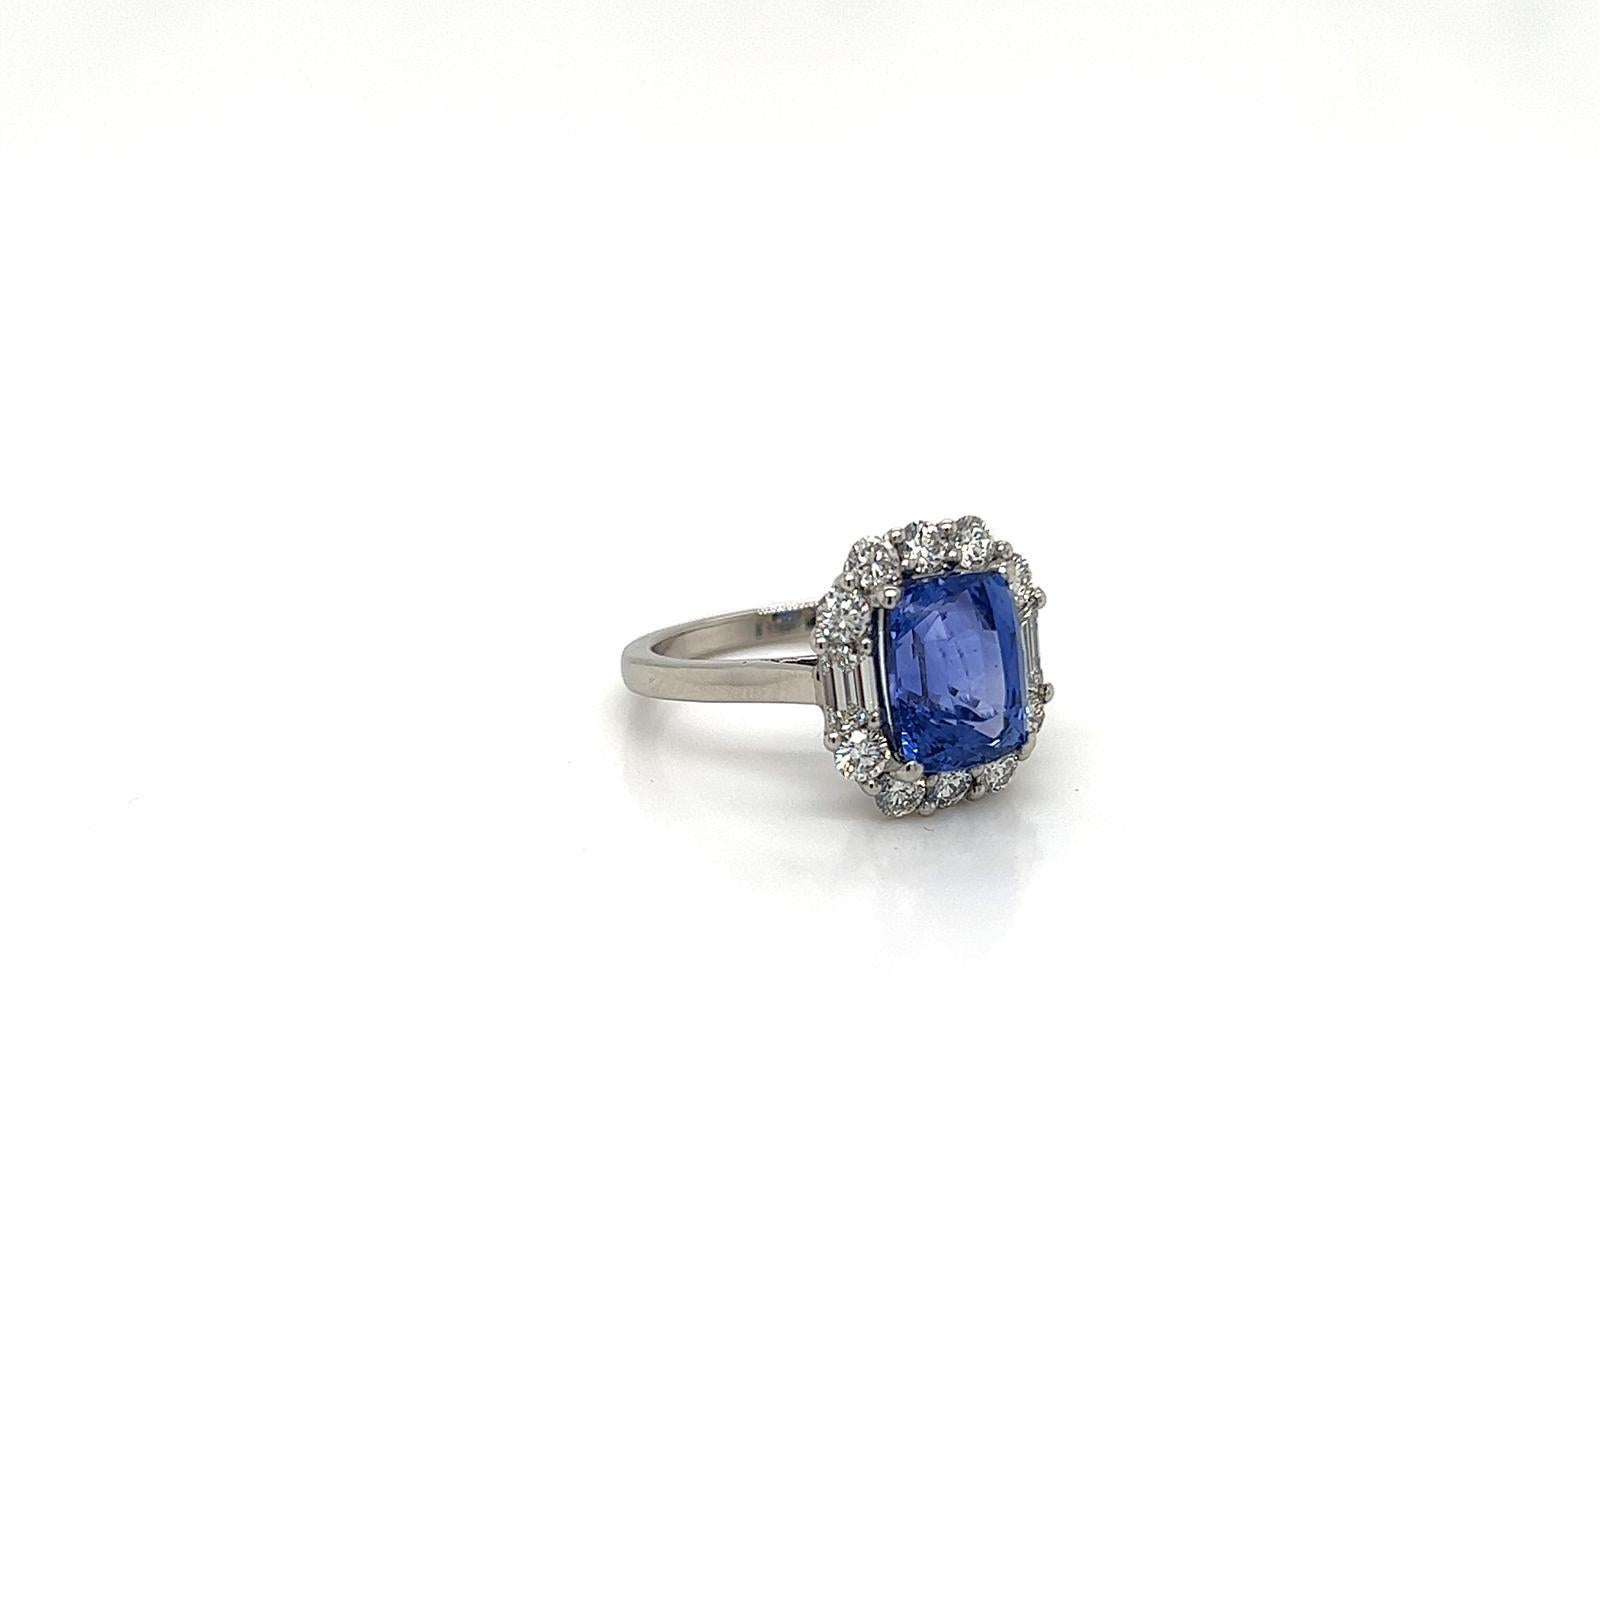 This striking ring features a flawless Oblong Cushion cut Blue Sapphire weighing 4.10 Carats at its centre with a unique arrangement of trapezoid and round brilliant diamonds surrounding it. The evident clarity of the alluring crystal clear blue